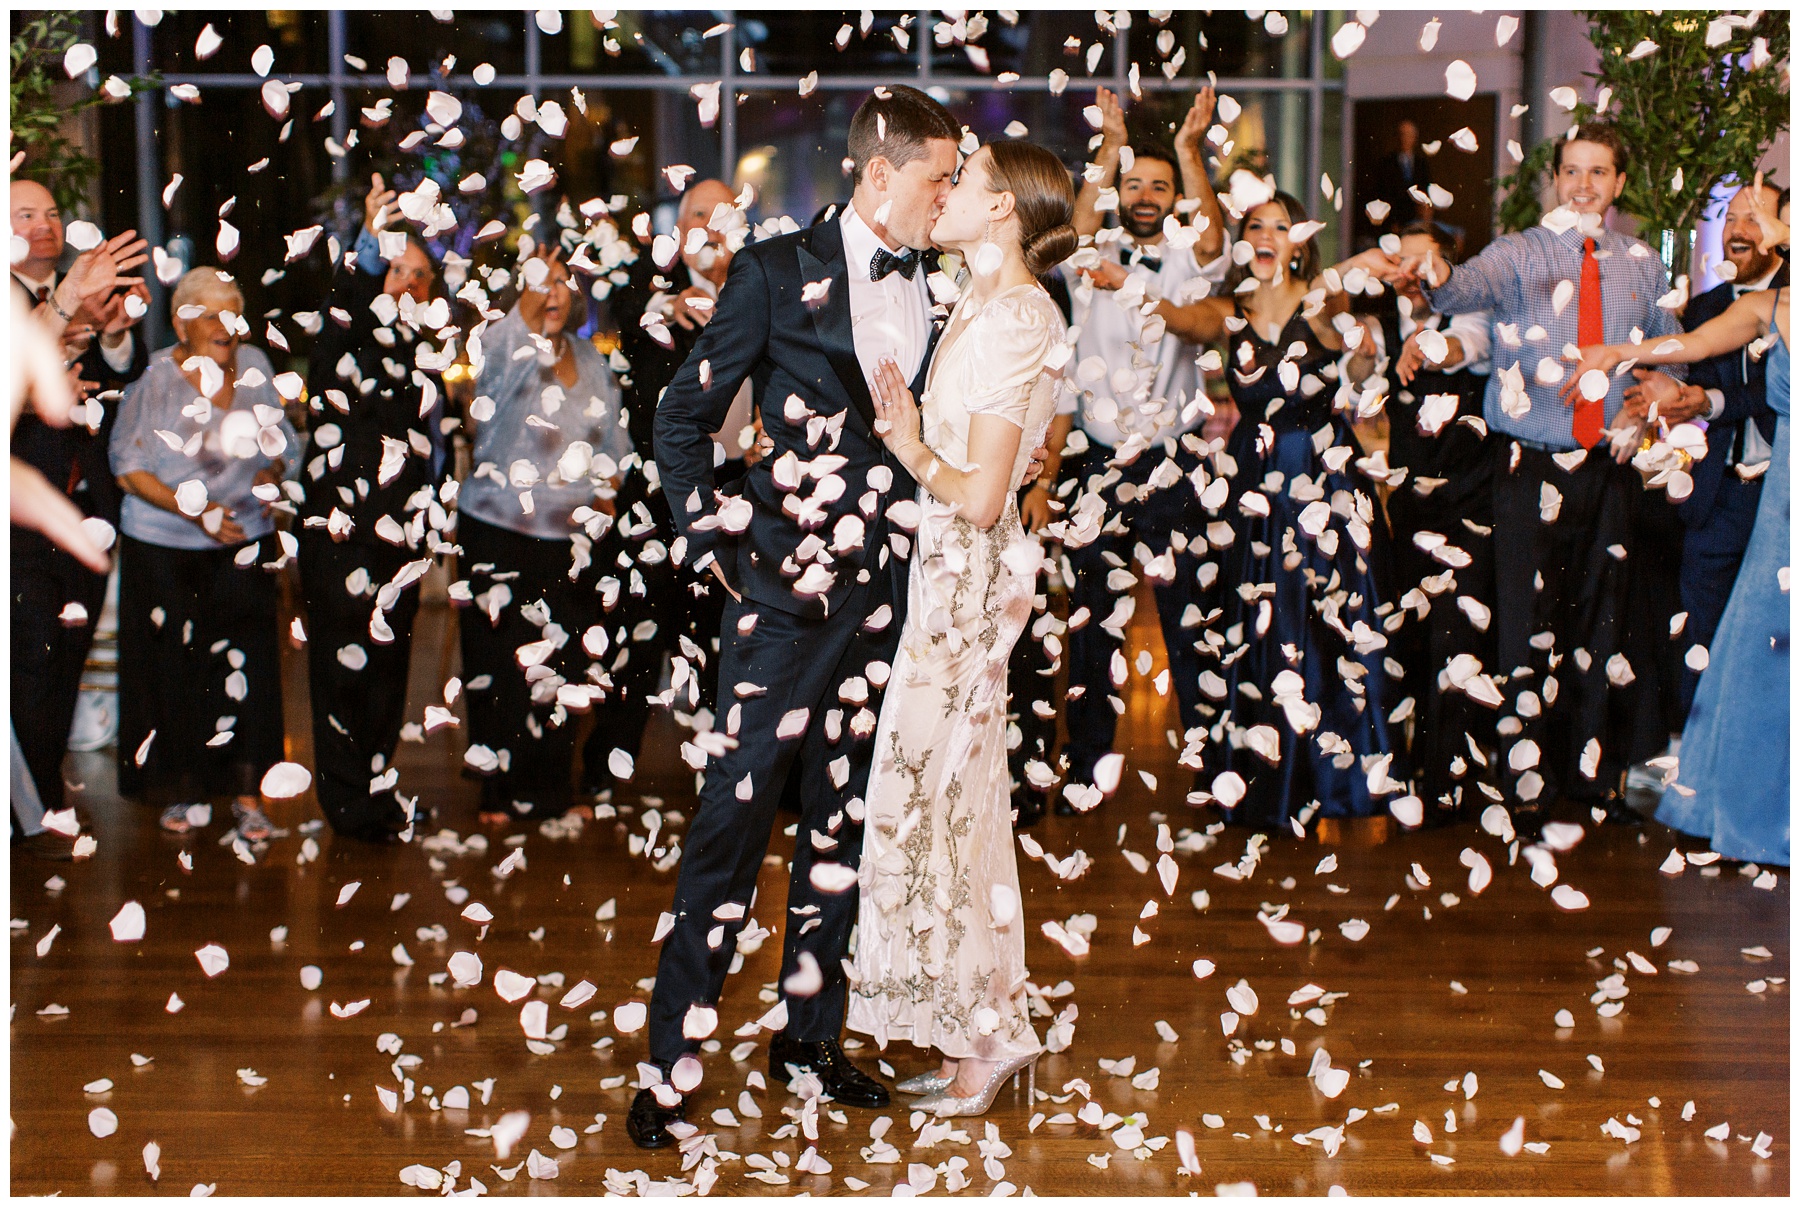 couple kisses on dance floor while petals fall during Charlotte wedding reception